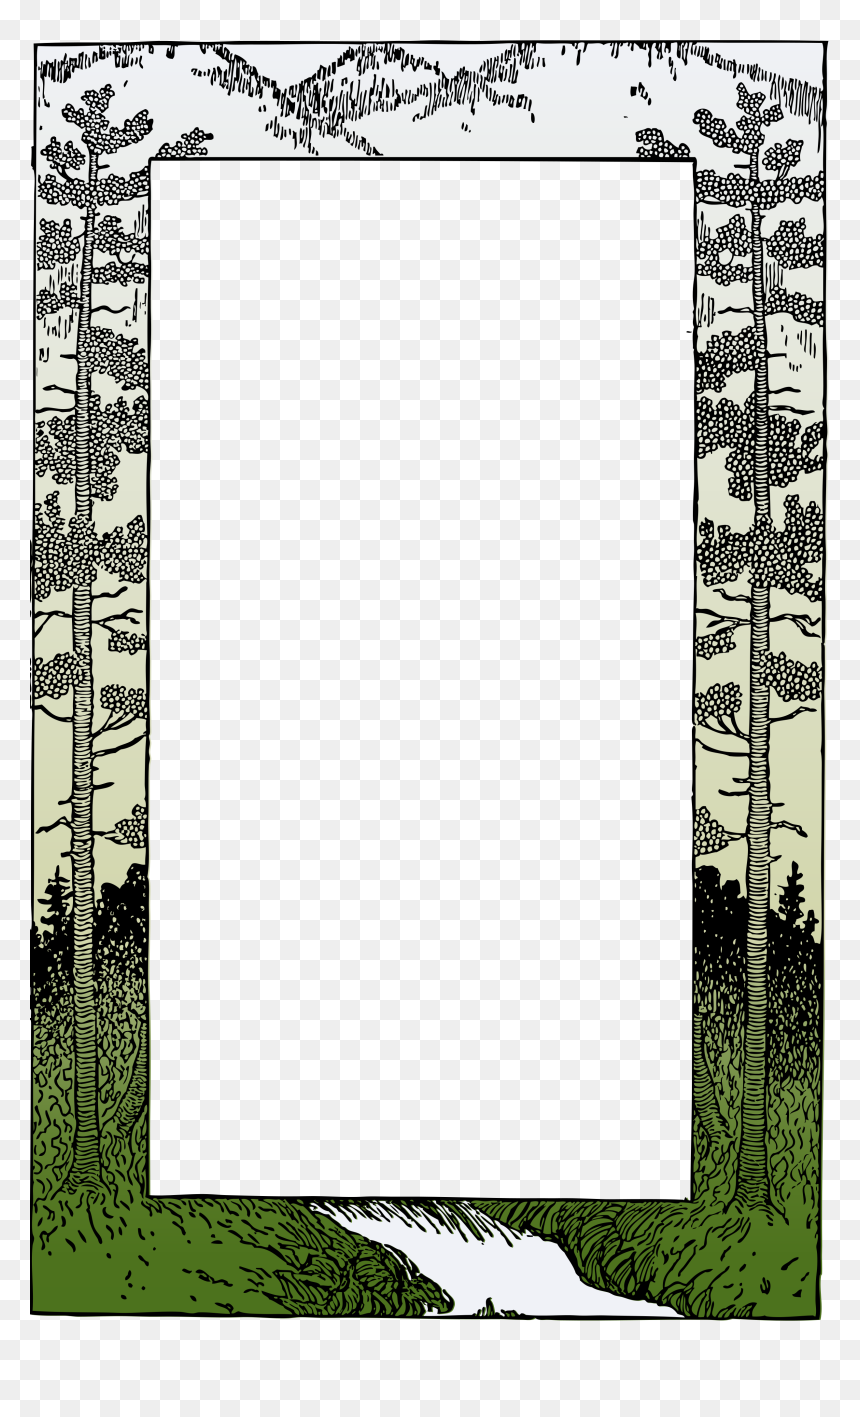 forest frames - Clip Art Library